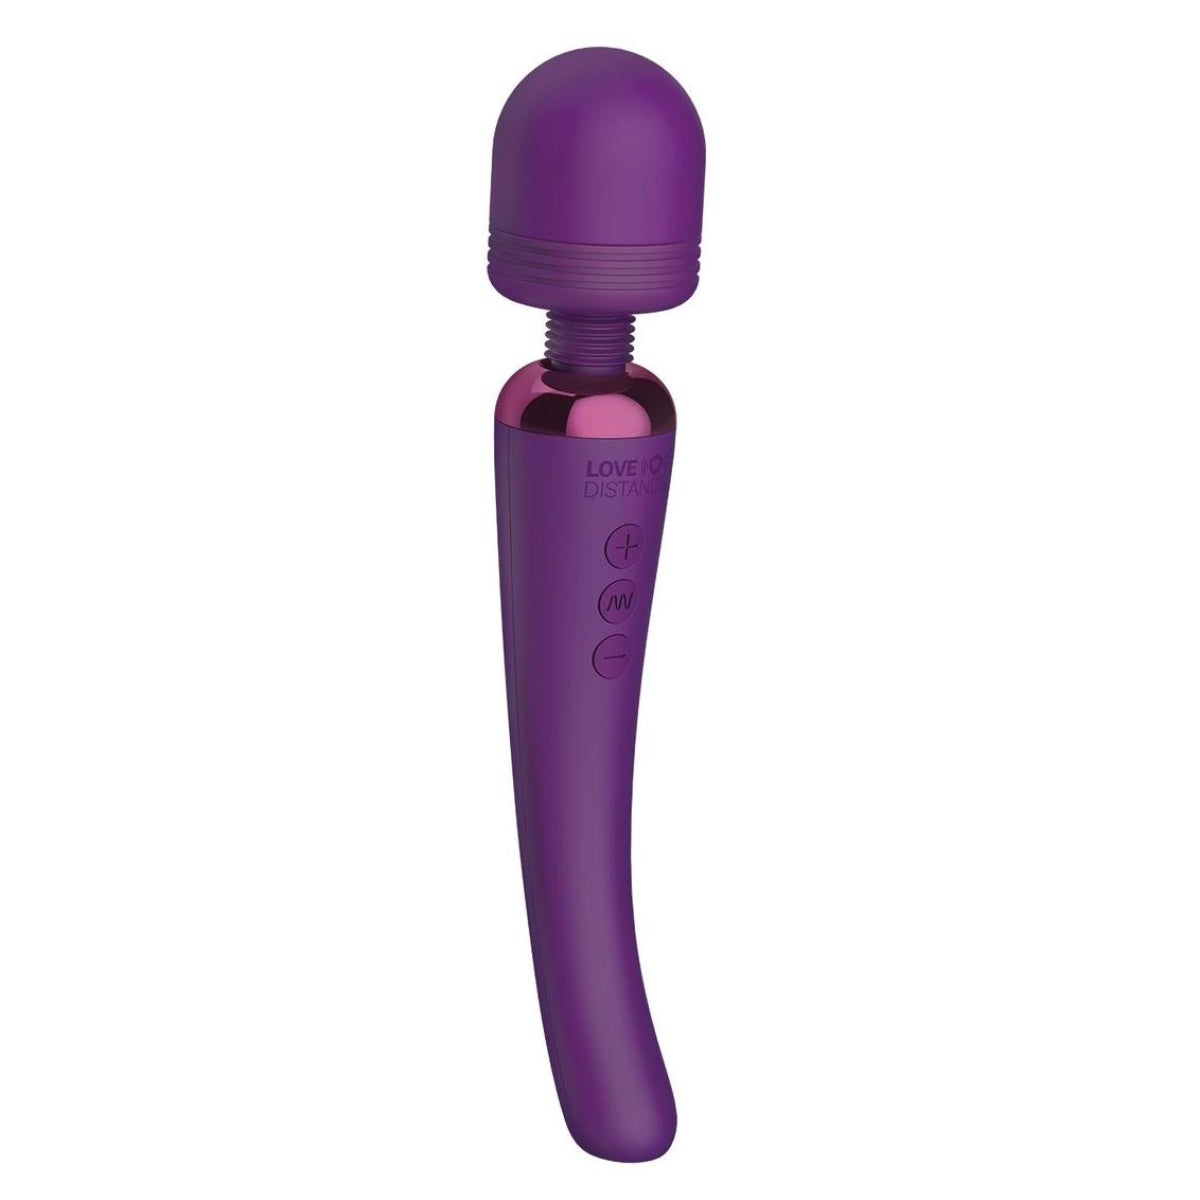 LOVE DISTANCE | GRASP App Controlled Vibrating Wand - Purple